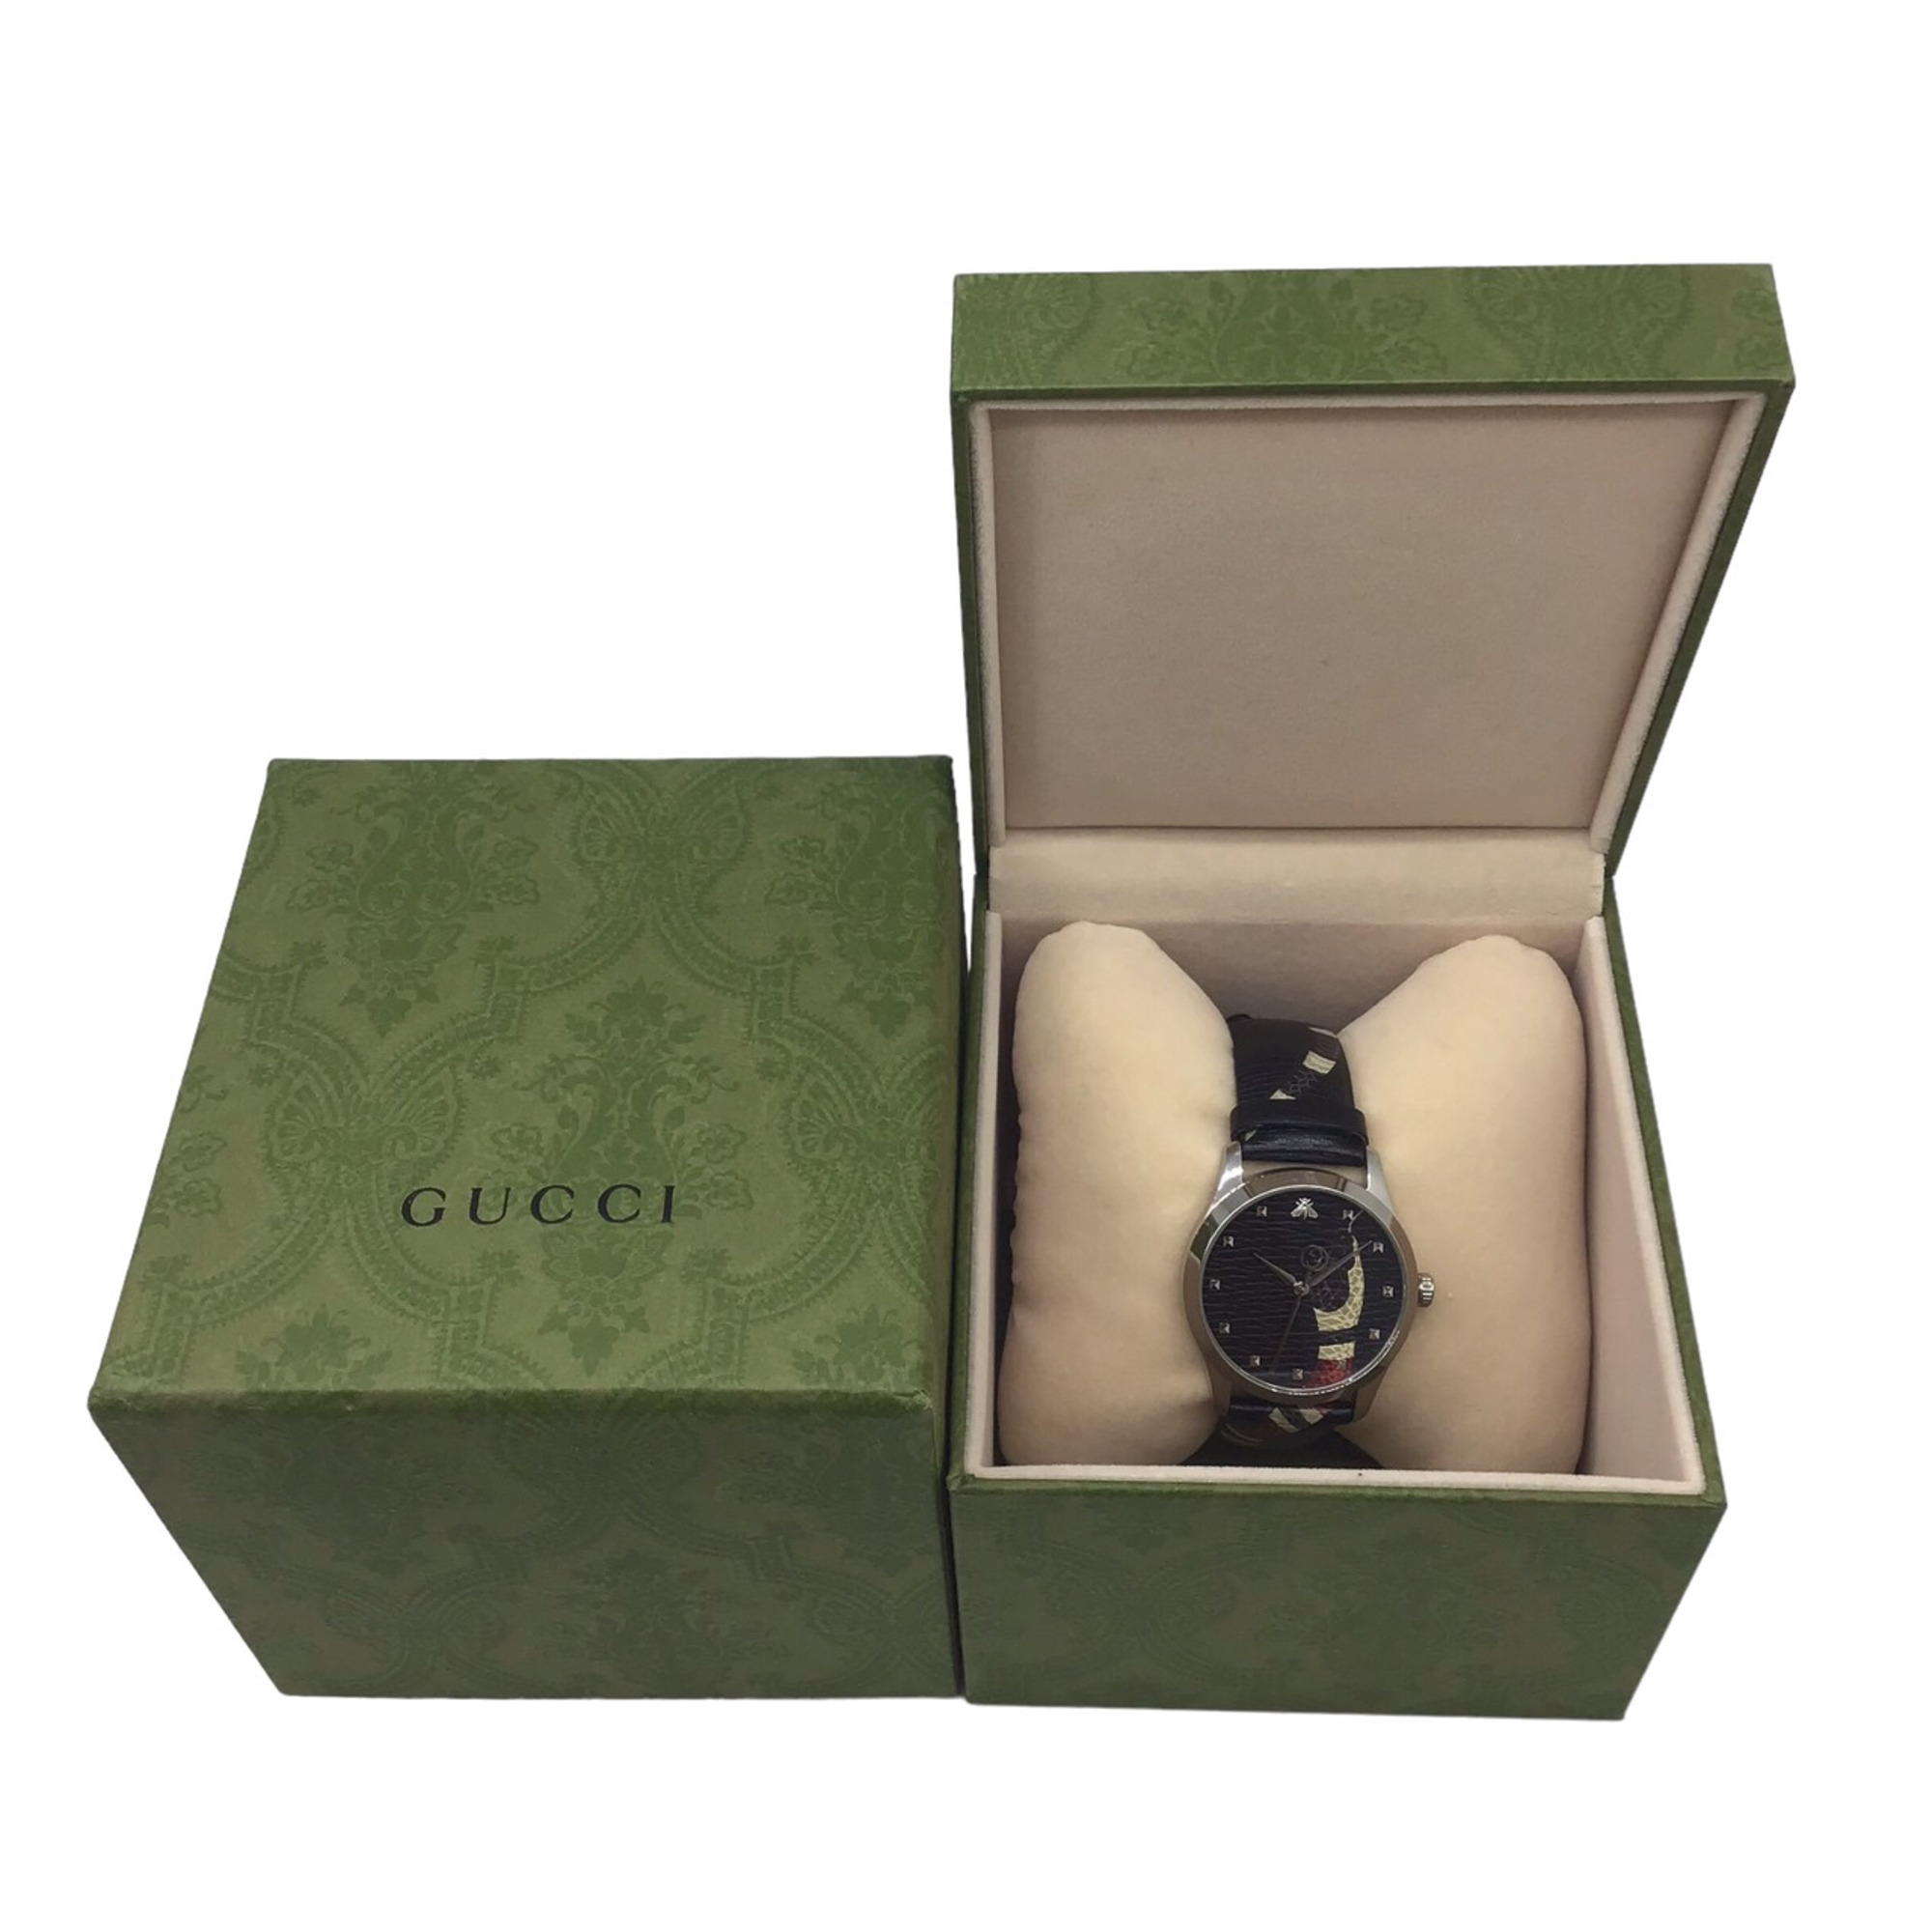 GUCCI G-Timeless King Snake YA1264007A Wristwatch Quartz Stainless Steel Leather Band Bee Men's Women's Unisex